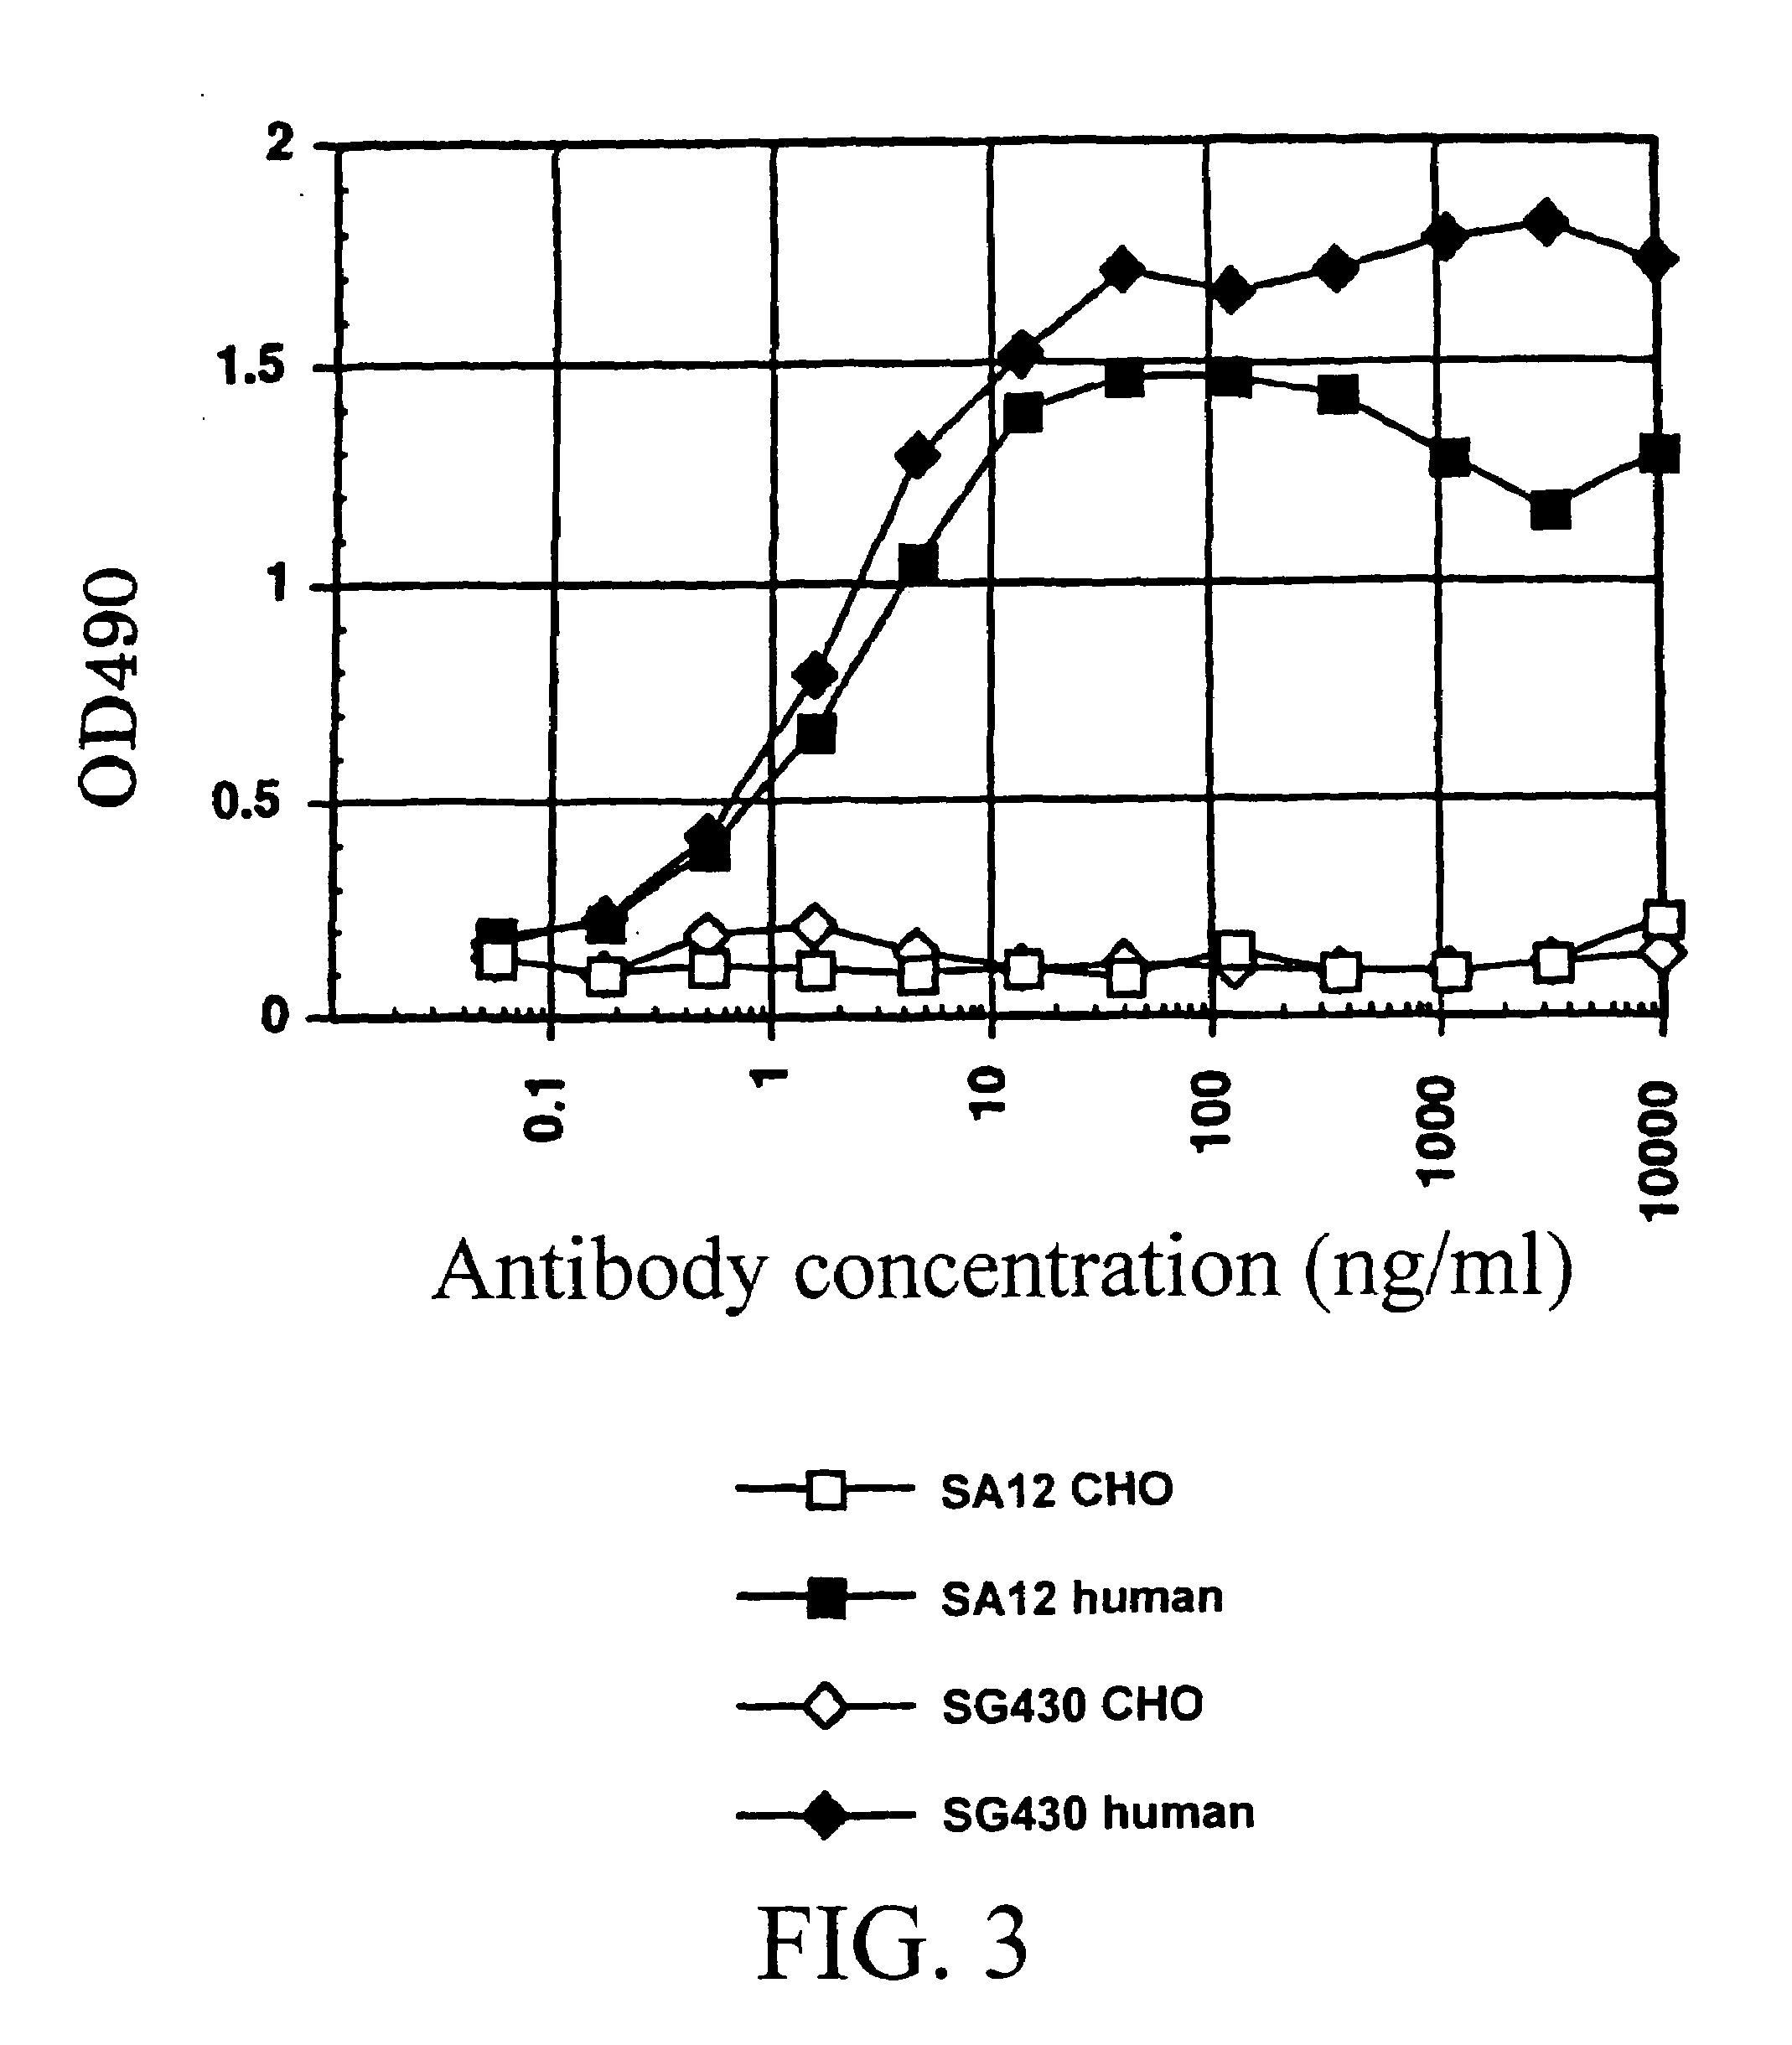 Methods of treating an inflammatory disorder and prohibiting proliferation, cytokine production, and signal transduction with antibody against costimulatory signal transduction molecule AILIM